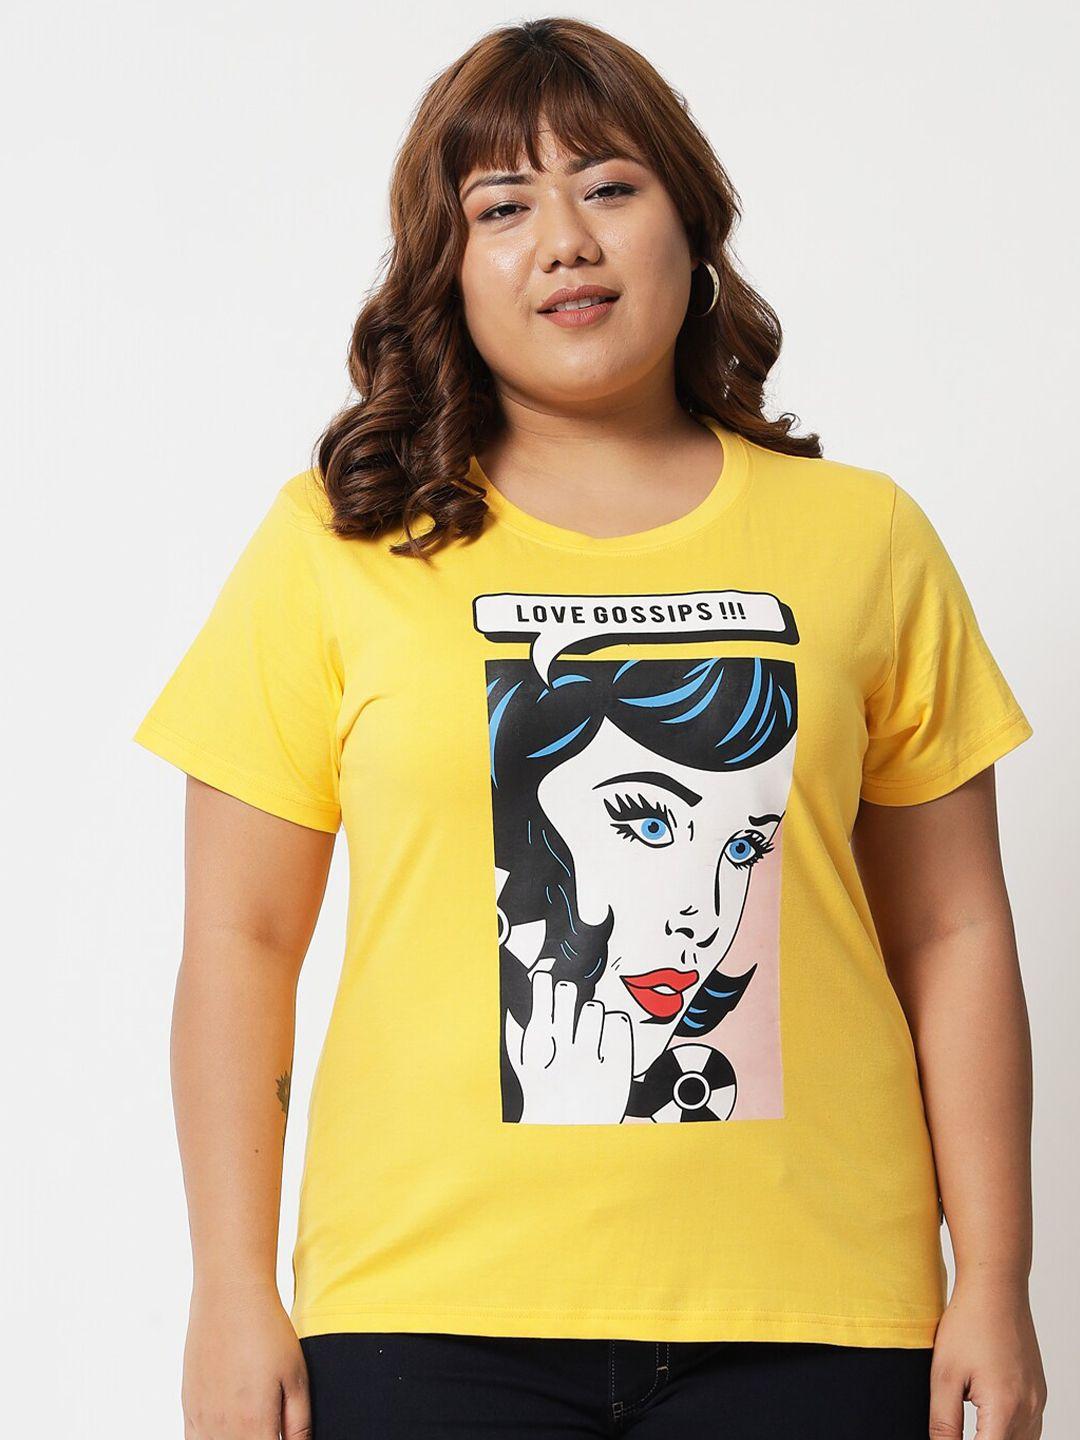 beyound size - the dry state plus size women yellow printed t-shirt